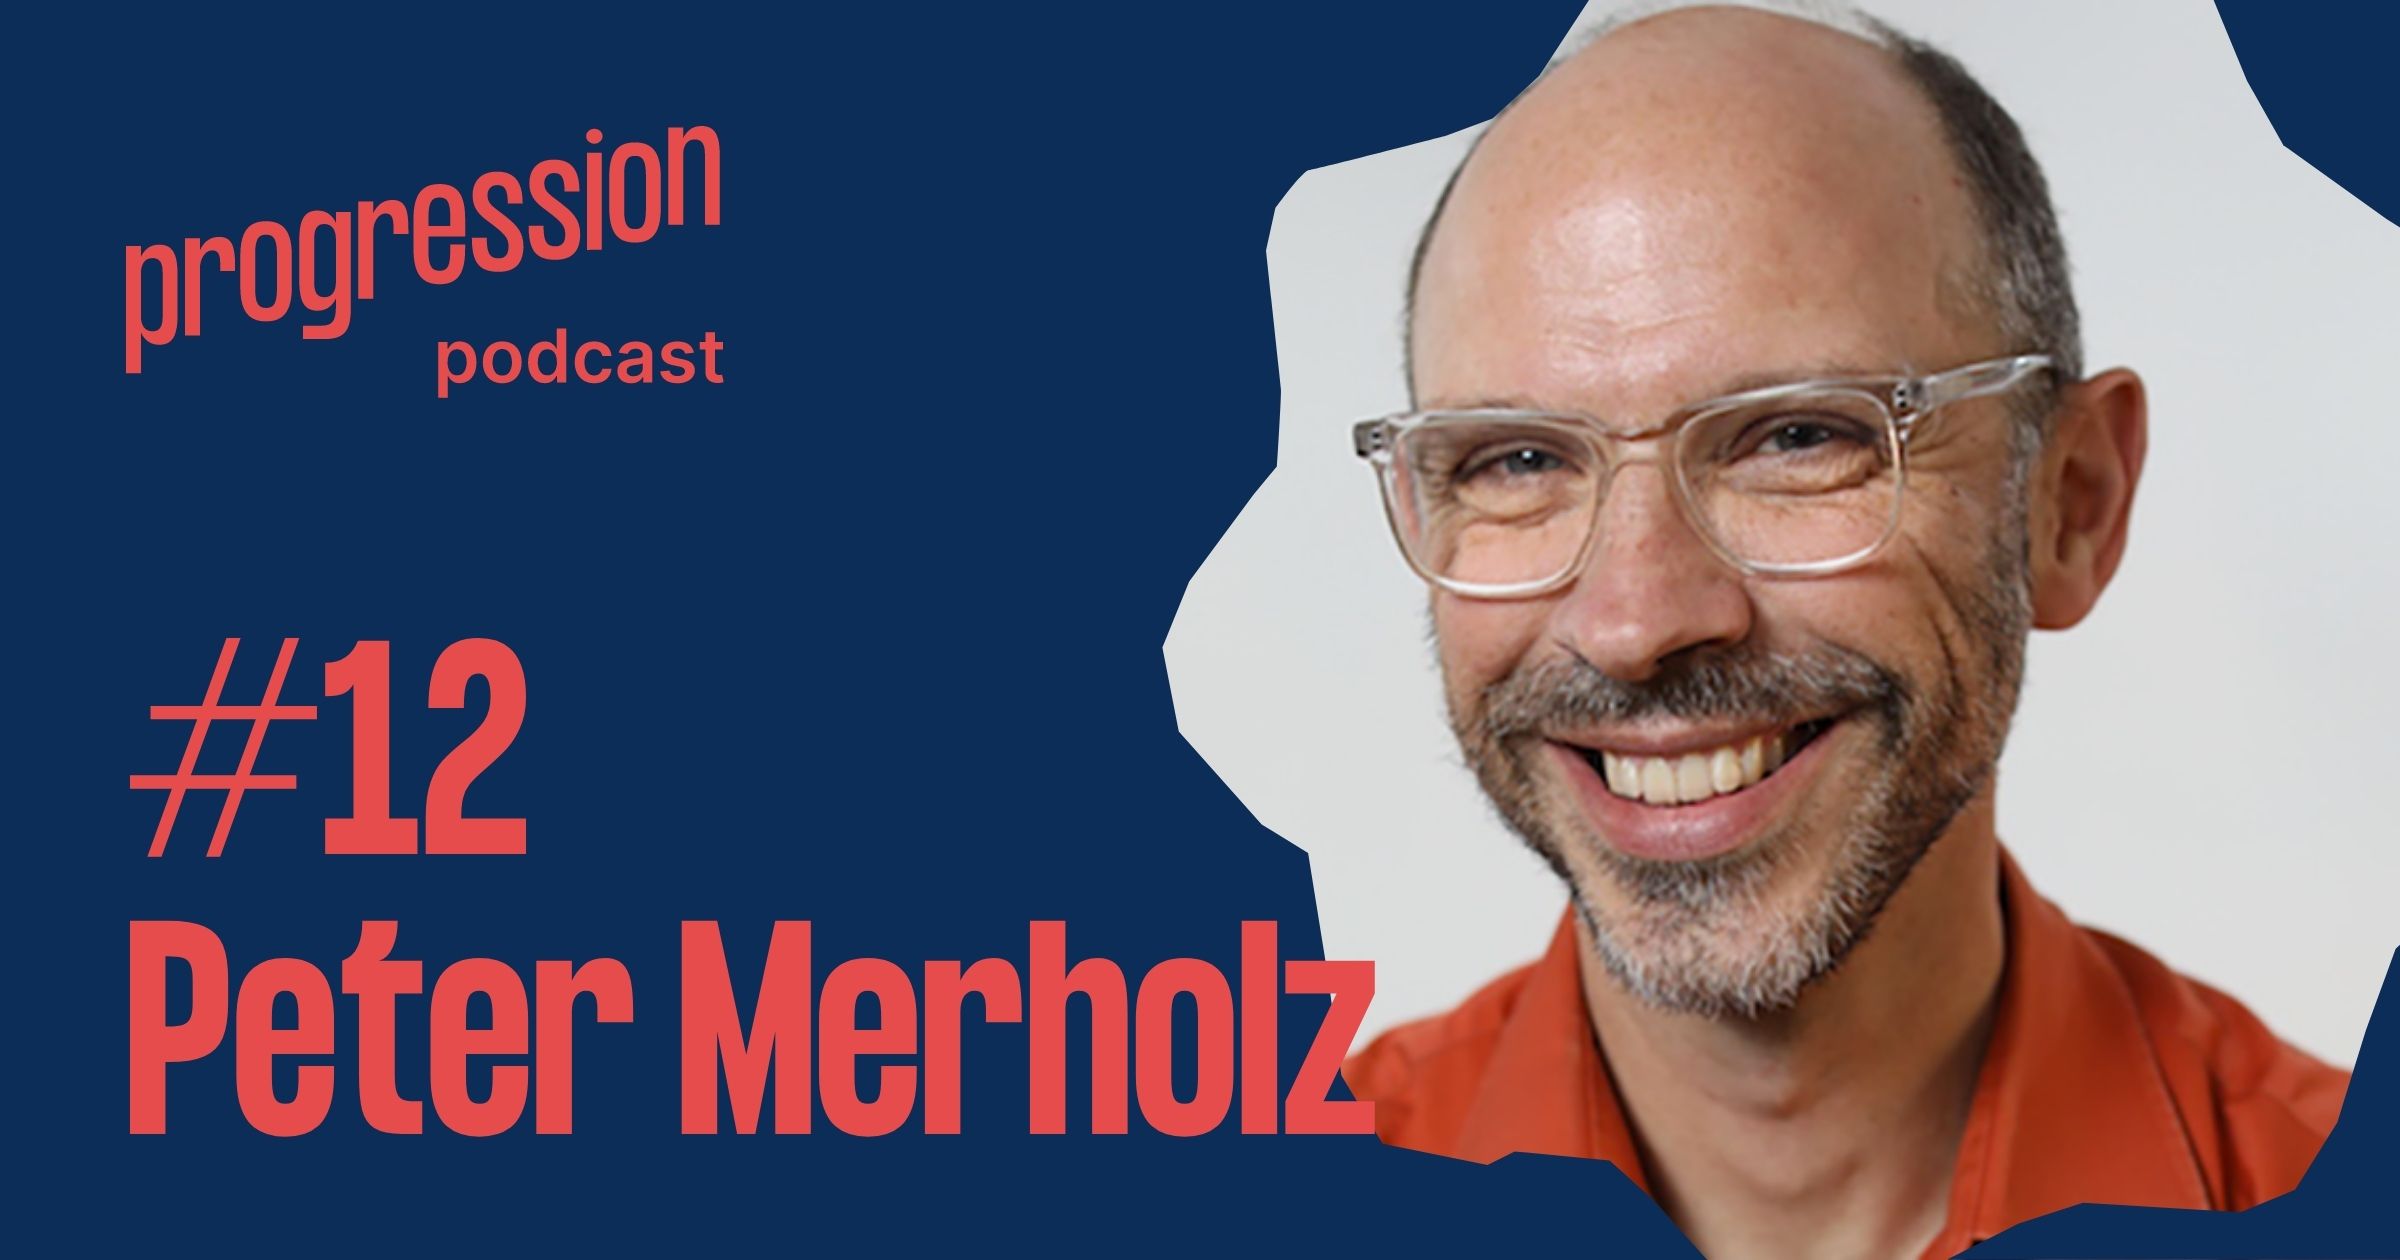 Podcast #12: Peter Merholz (Adaptive Path, Org Design for Design Orgs) on org design and ethics